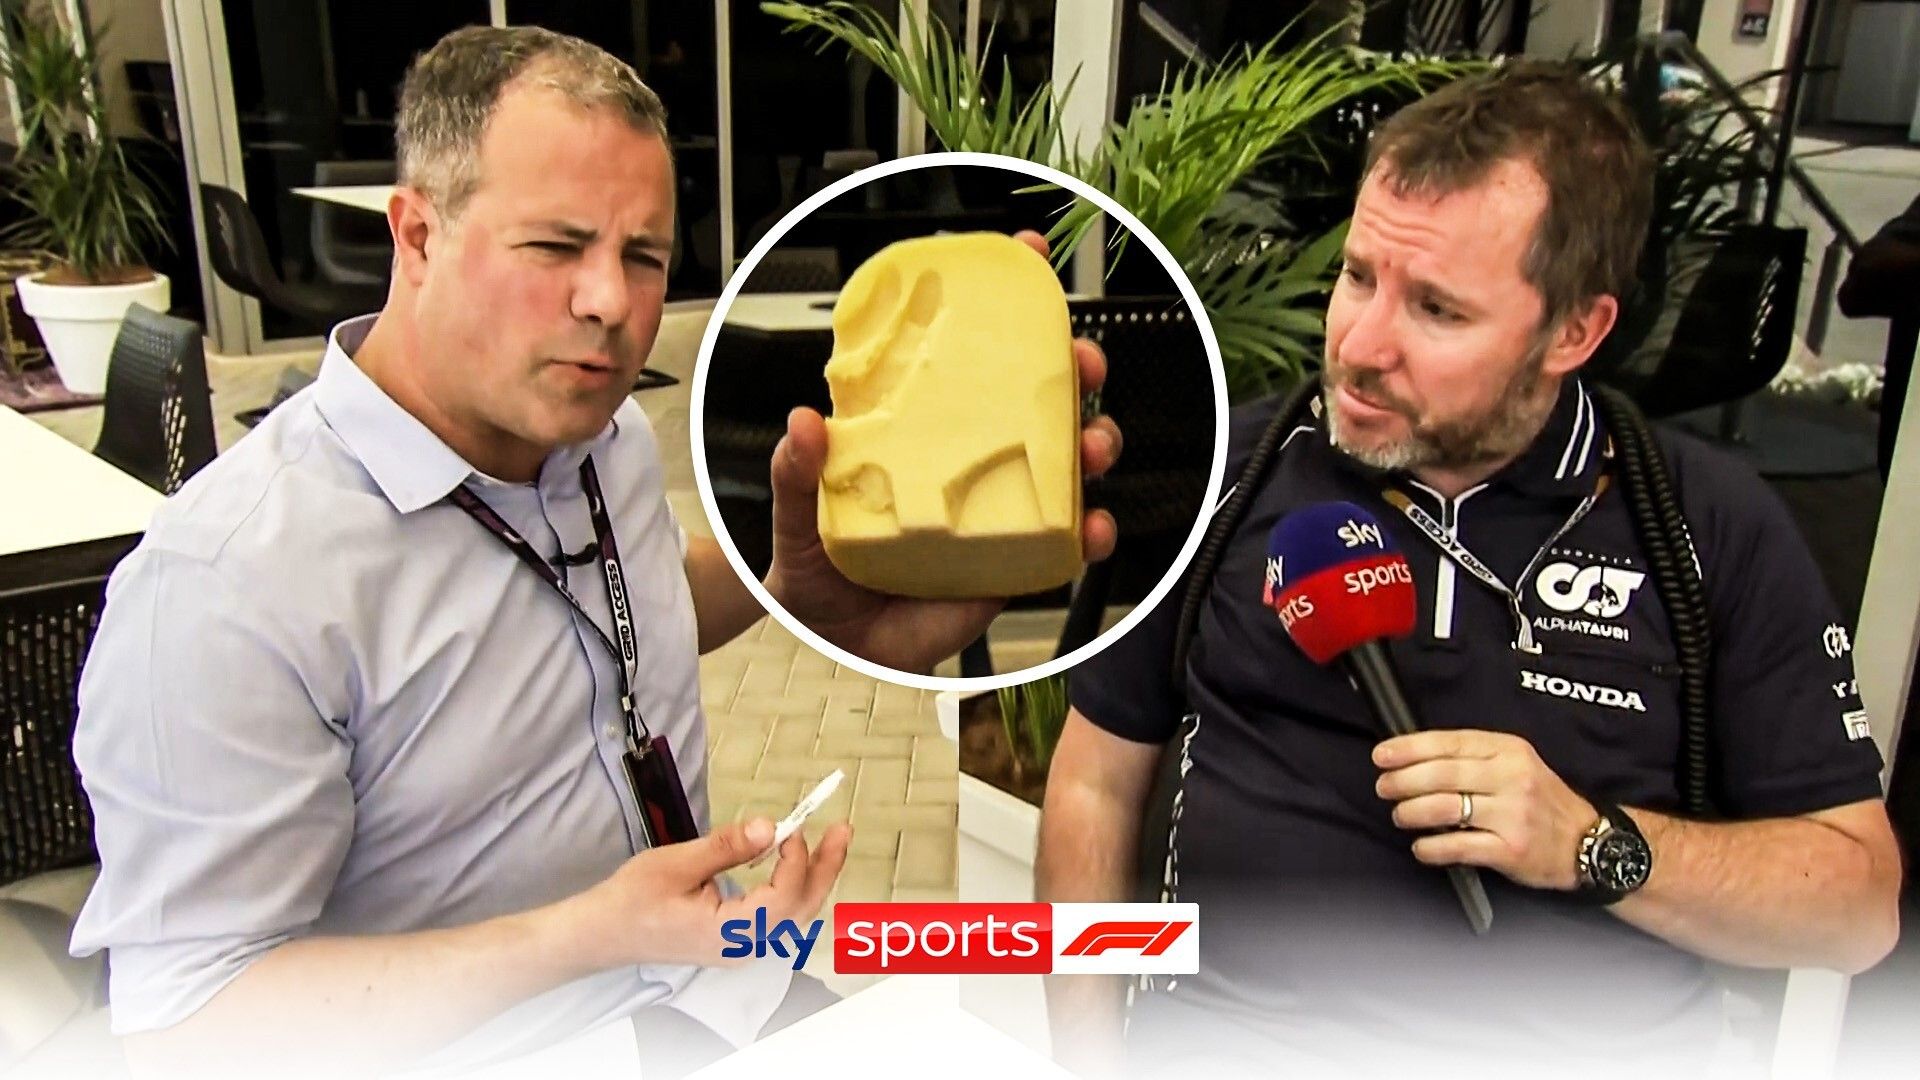 Ted explains F1 rule changes with cheese!